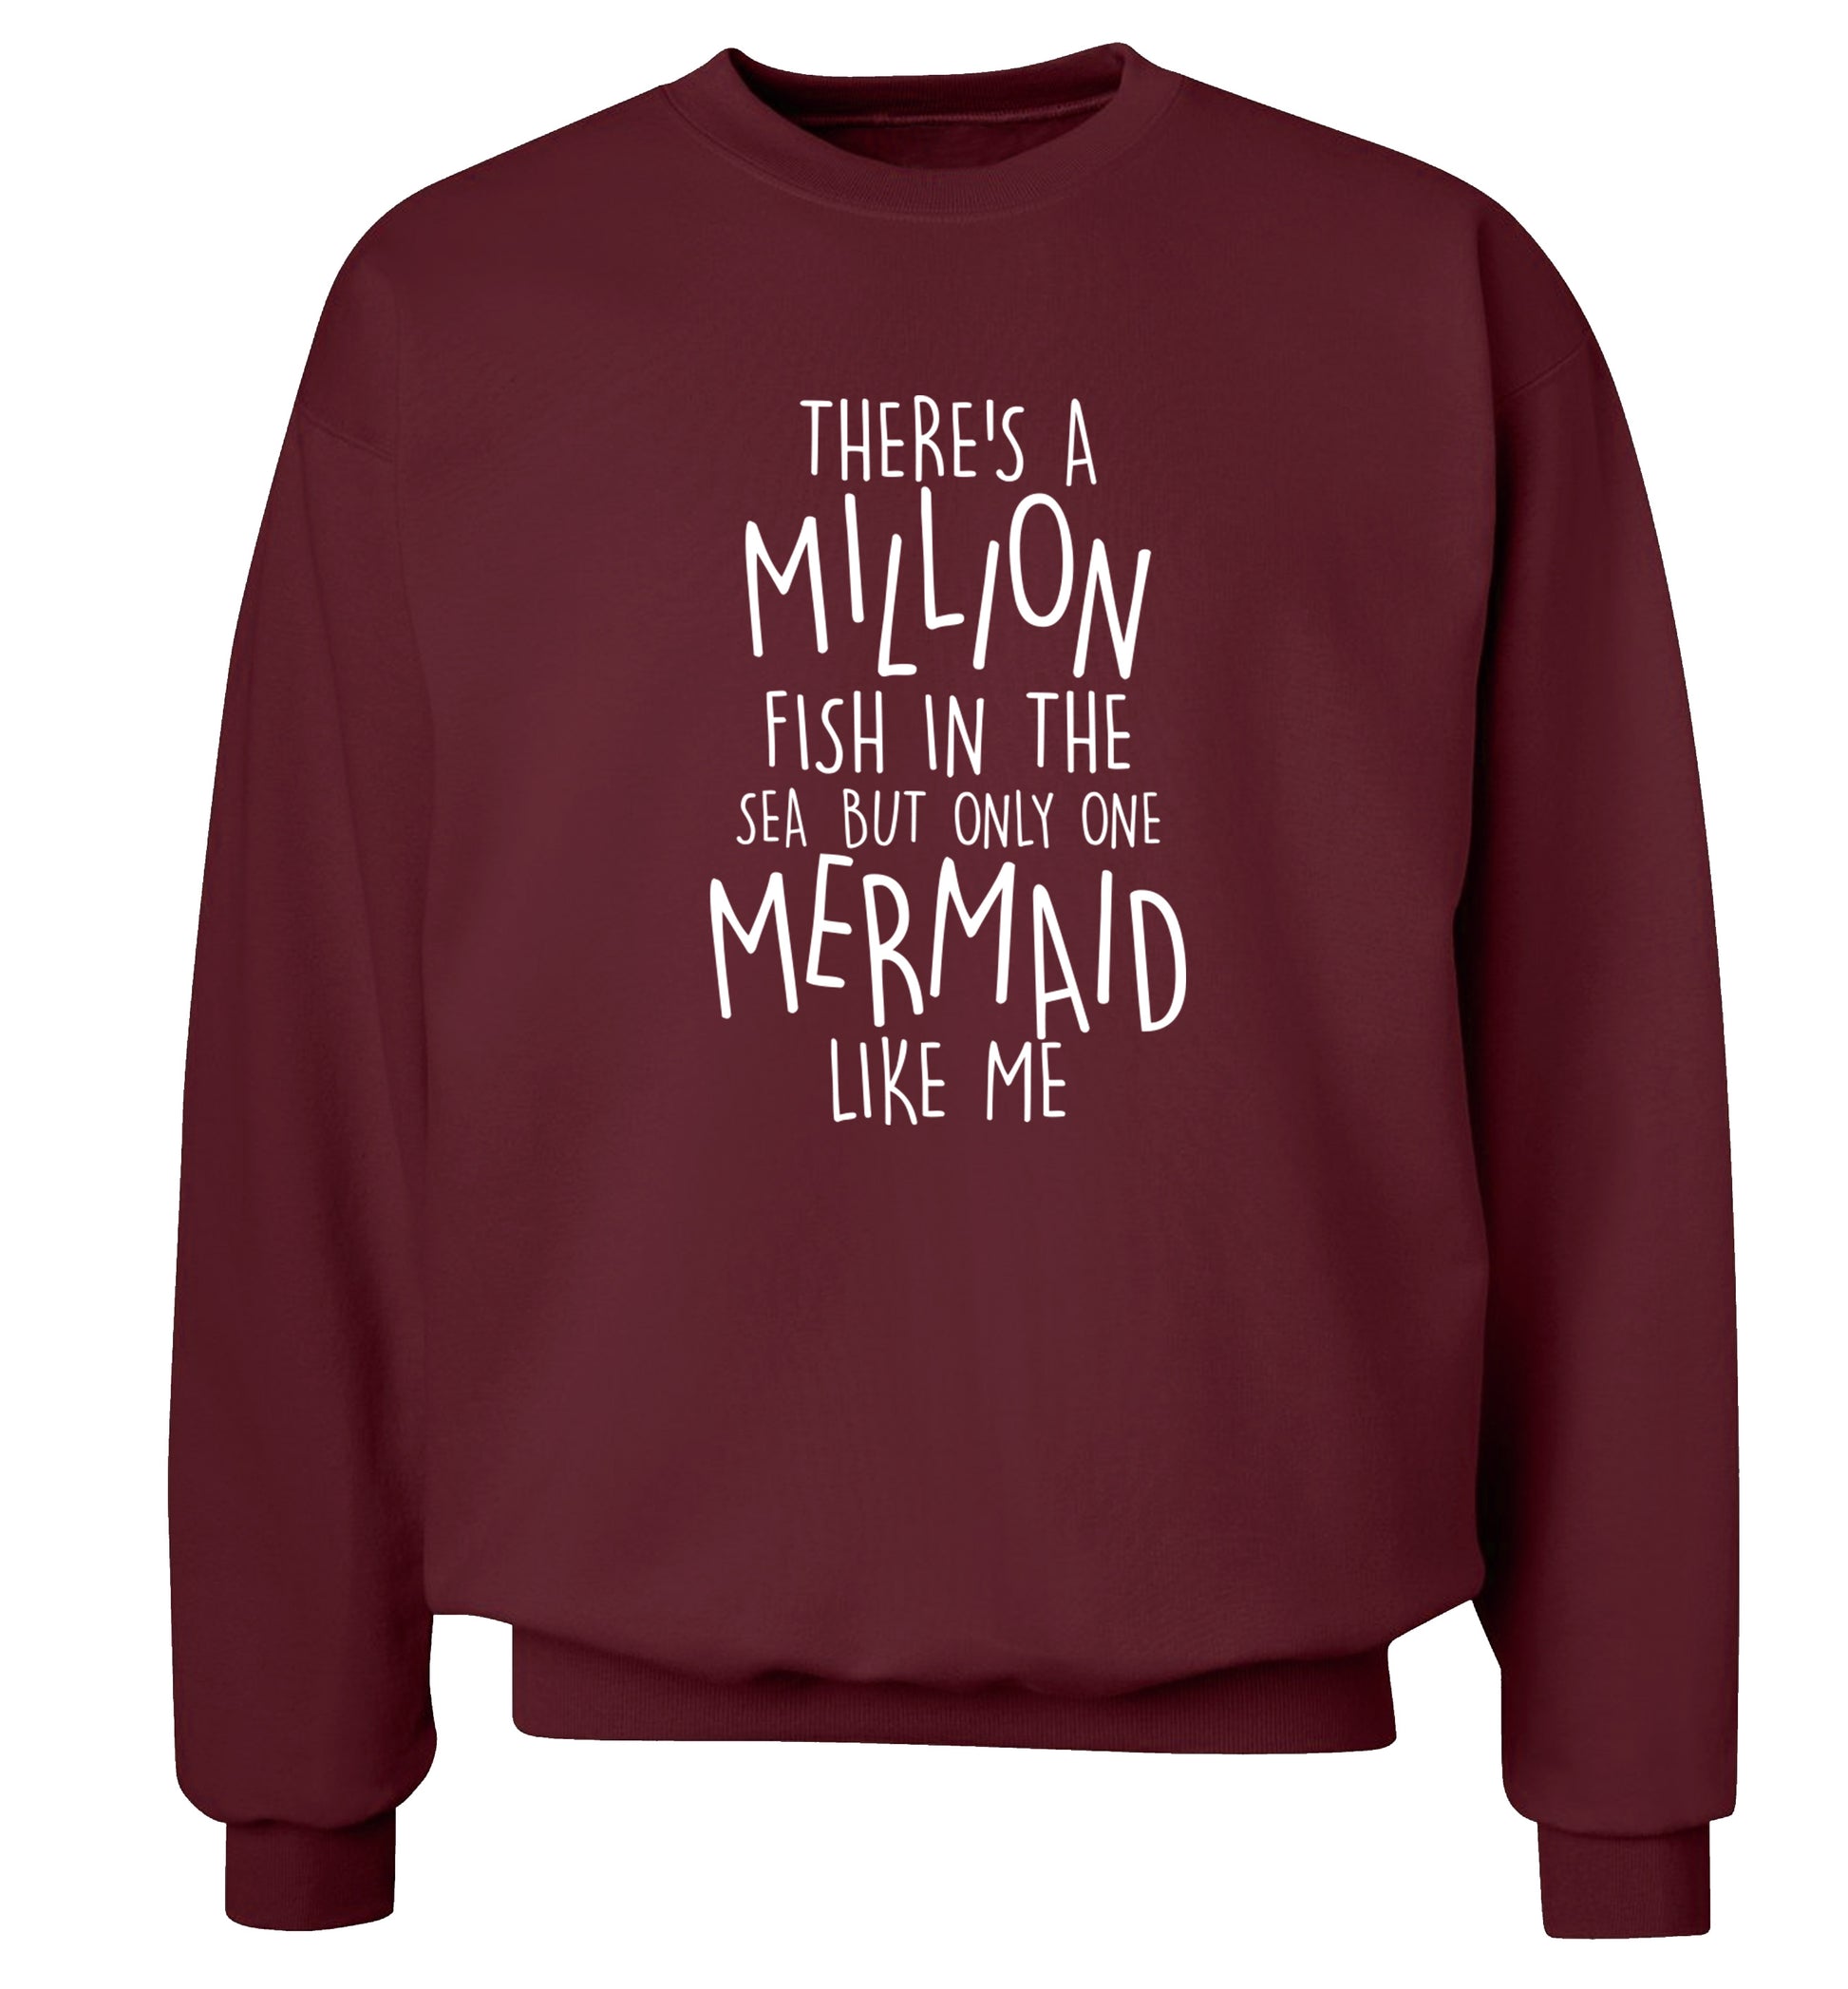 There's a million fish in the sea but only one mermaid like me Adult's unisex maroon Sweater 2XL